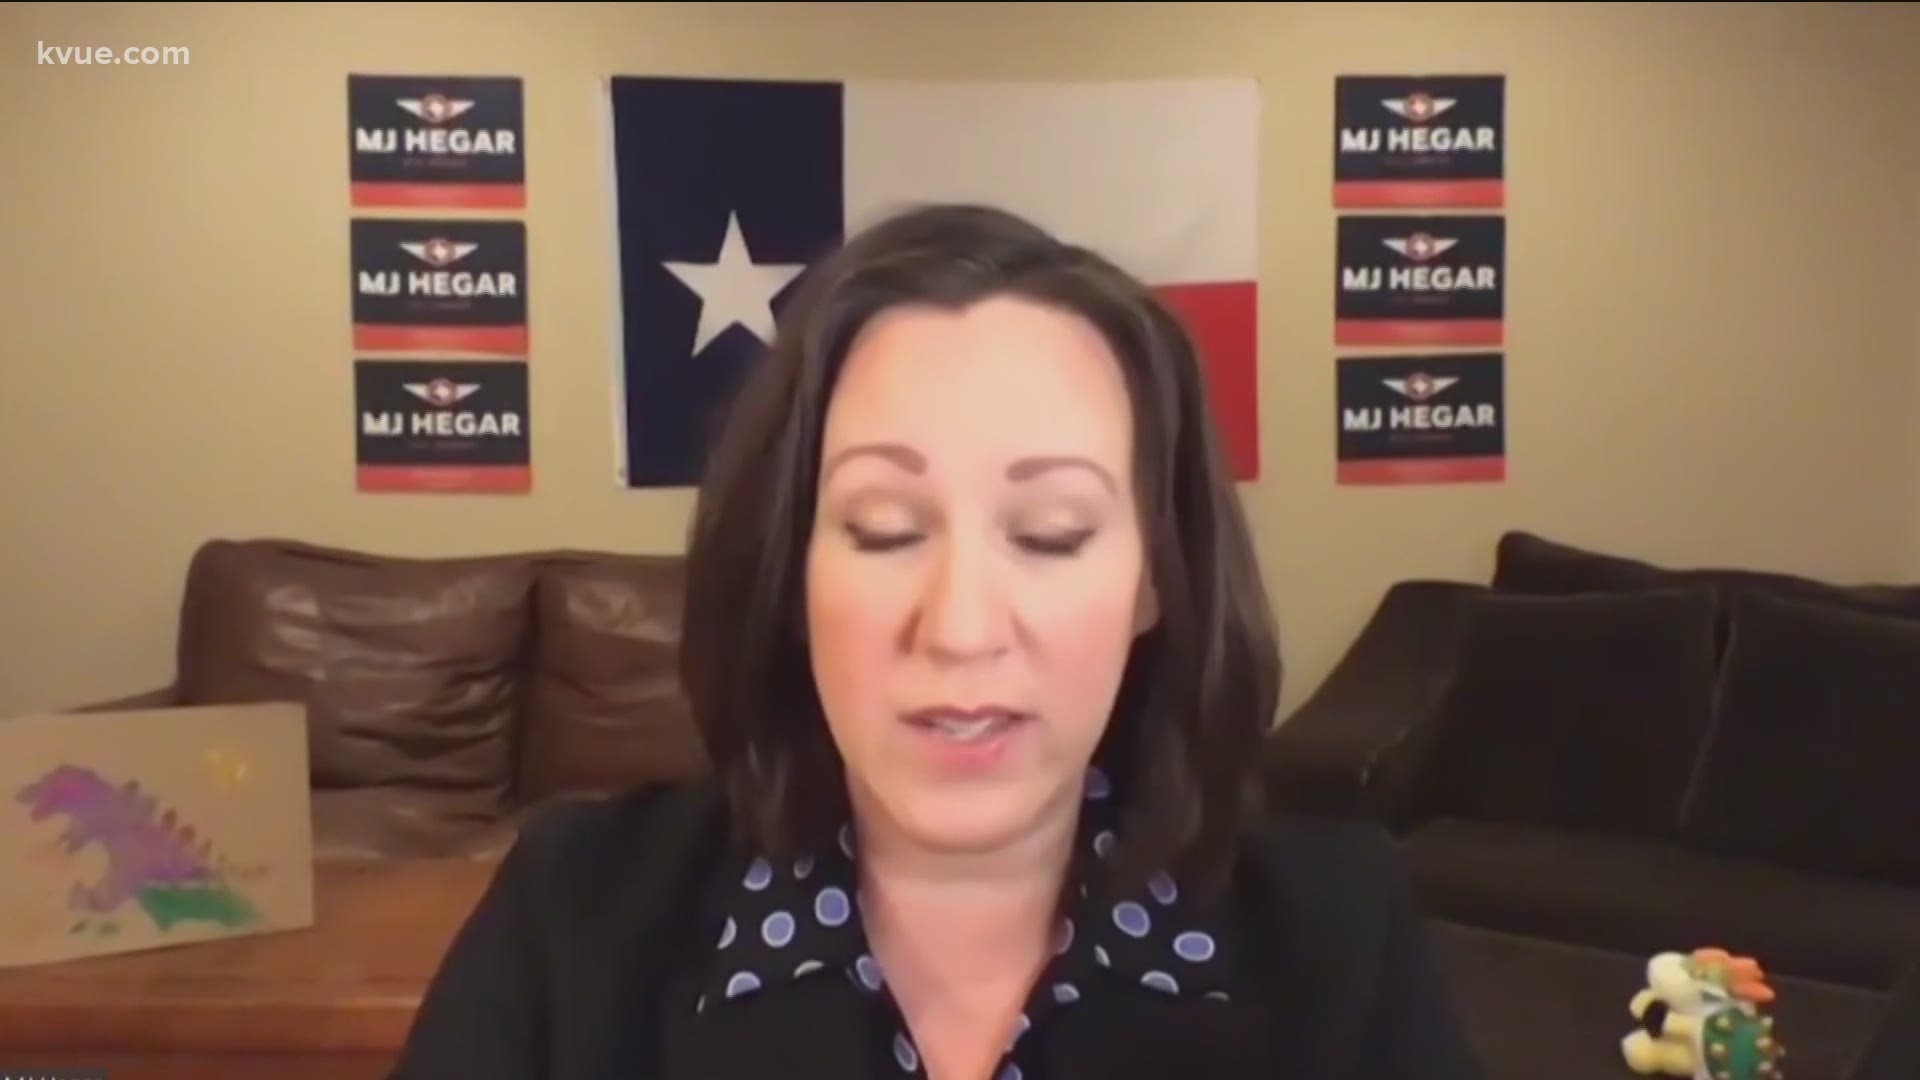 The stage is now set for the Texas 2020 U.S. Senate race. KVUE Political Anchor Ashley Goudeau spoke with Democratic nominee MJ Hegar.